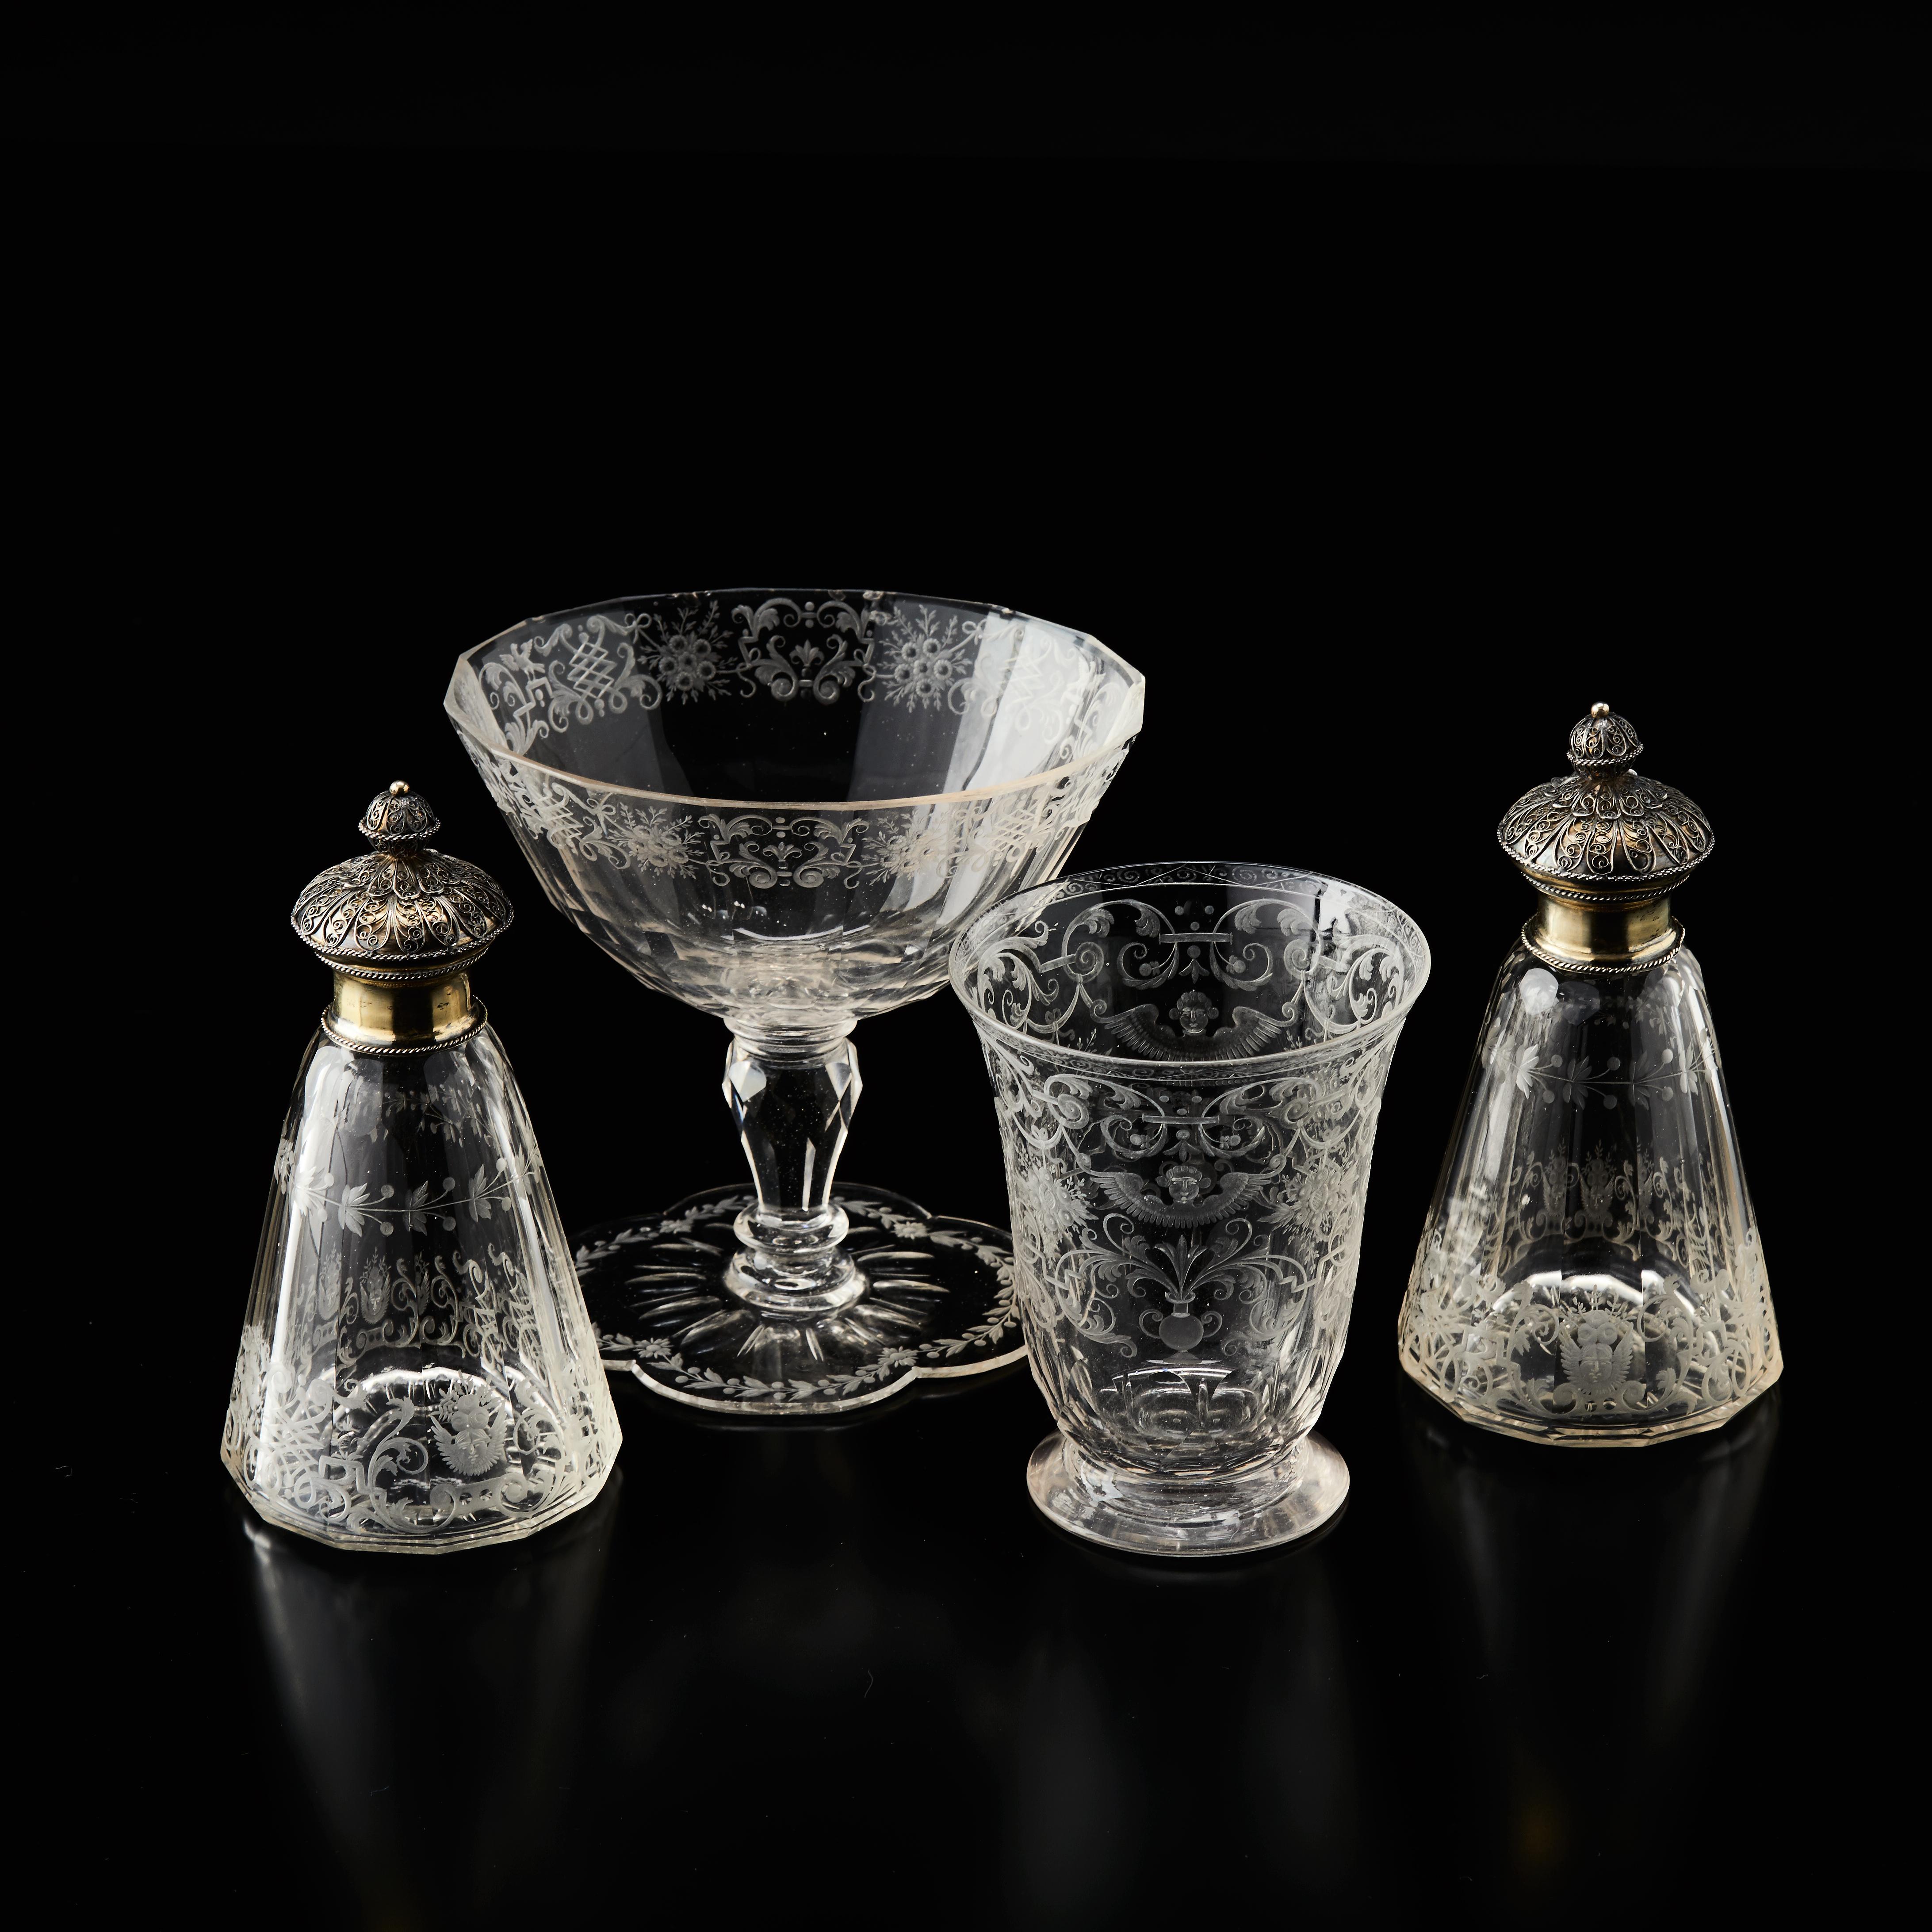 German Cased Travelling Set of Engraved Glass Silesia, circa 1720